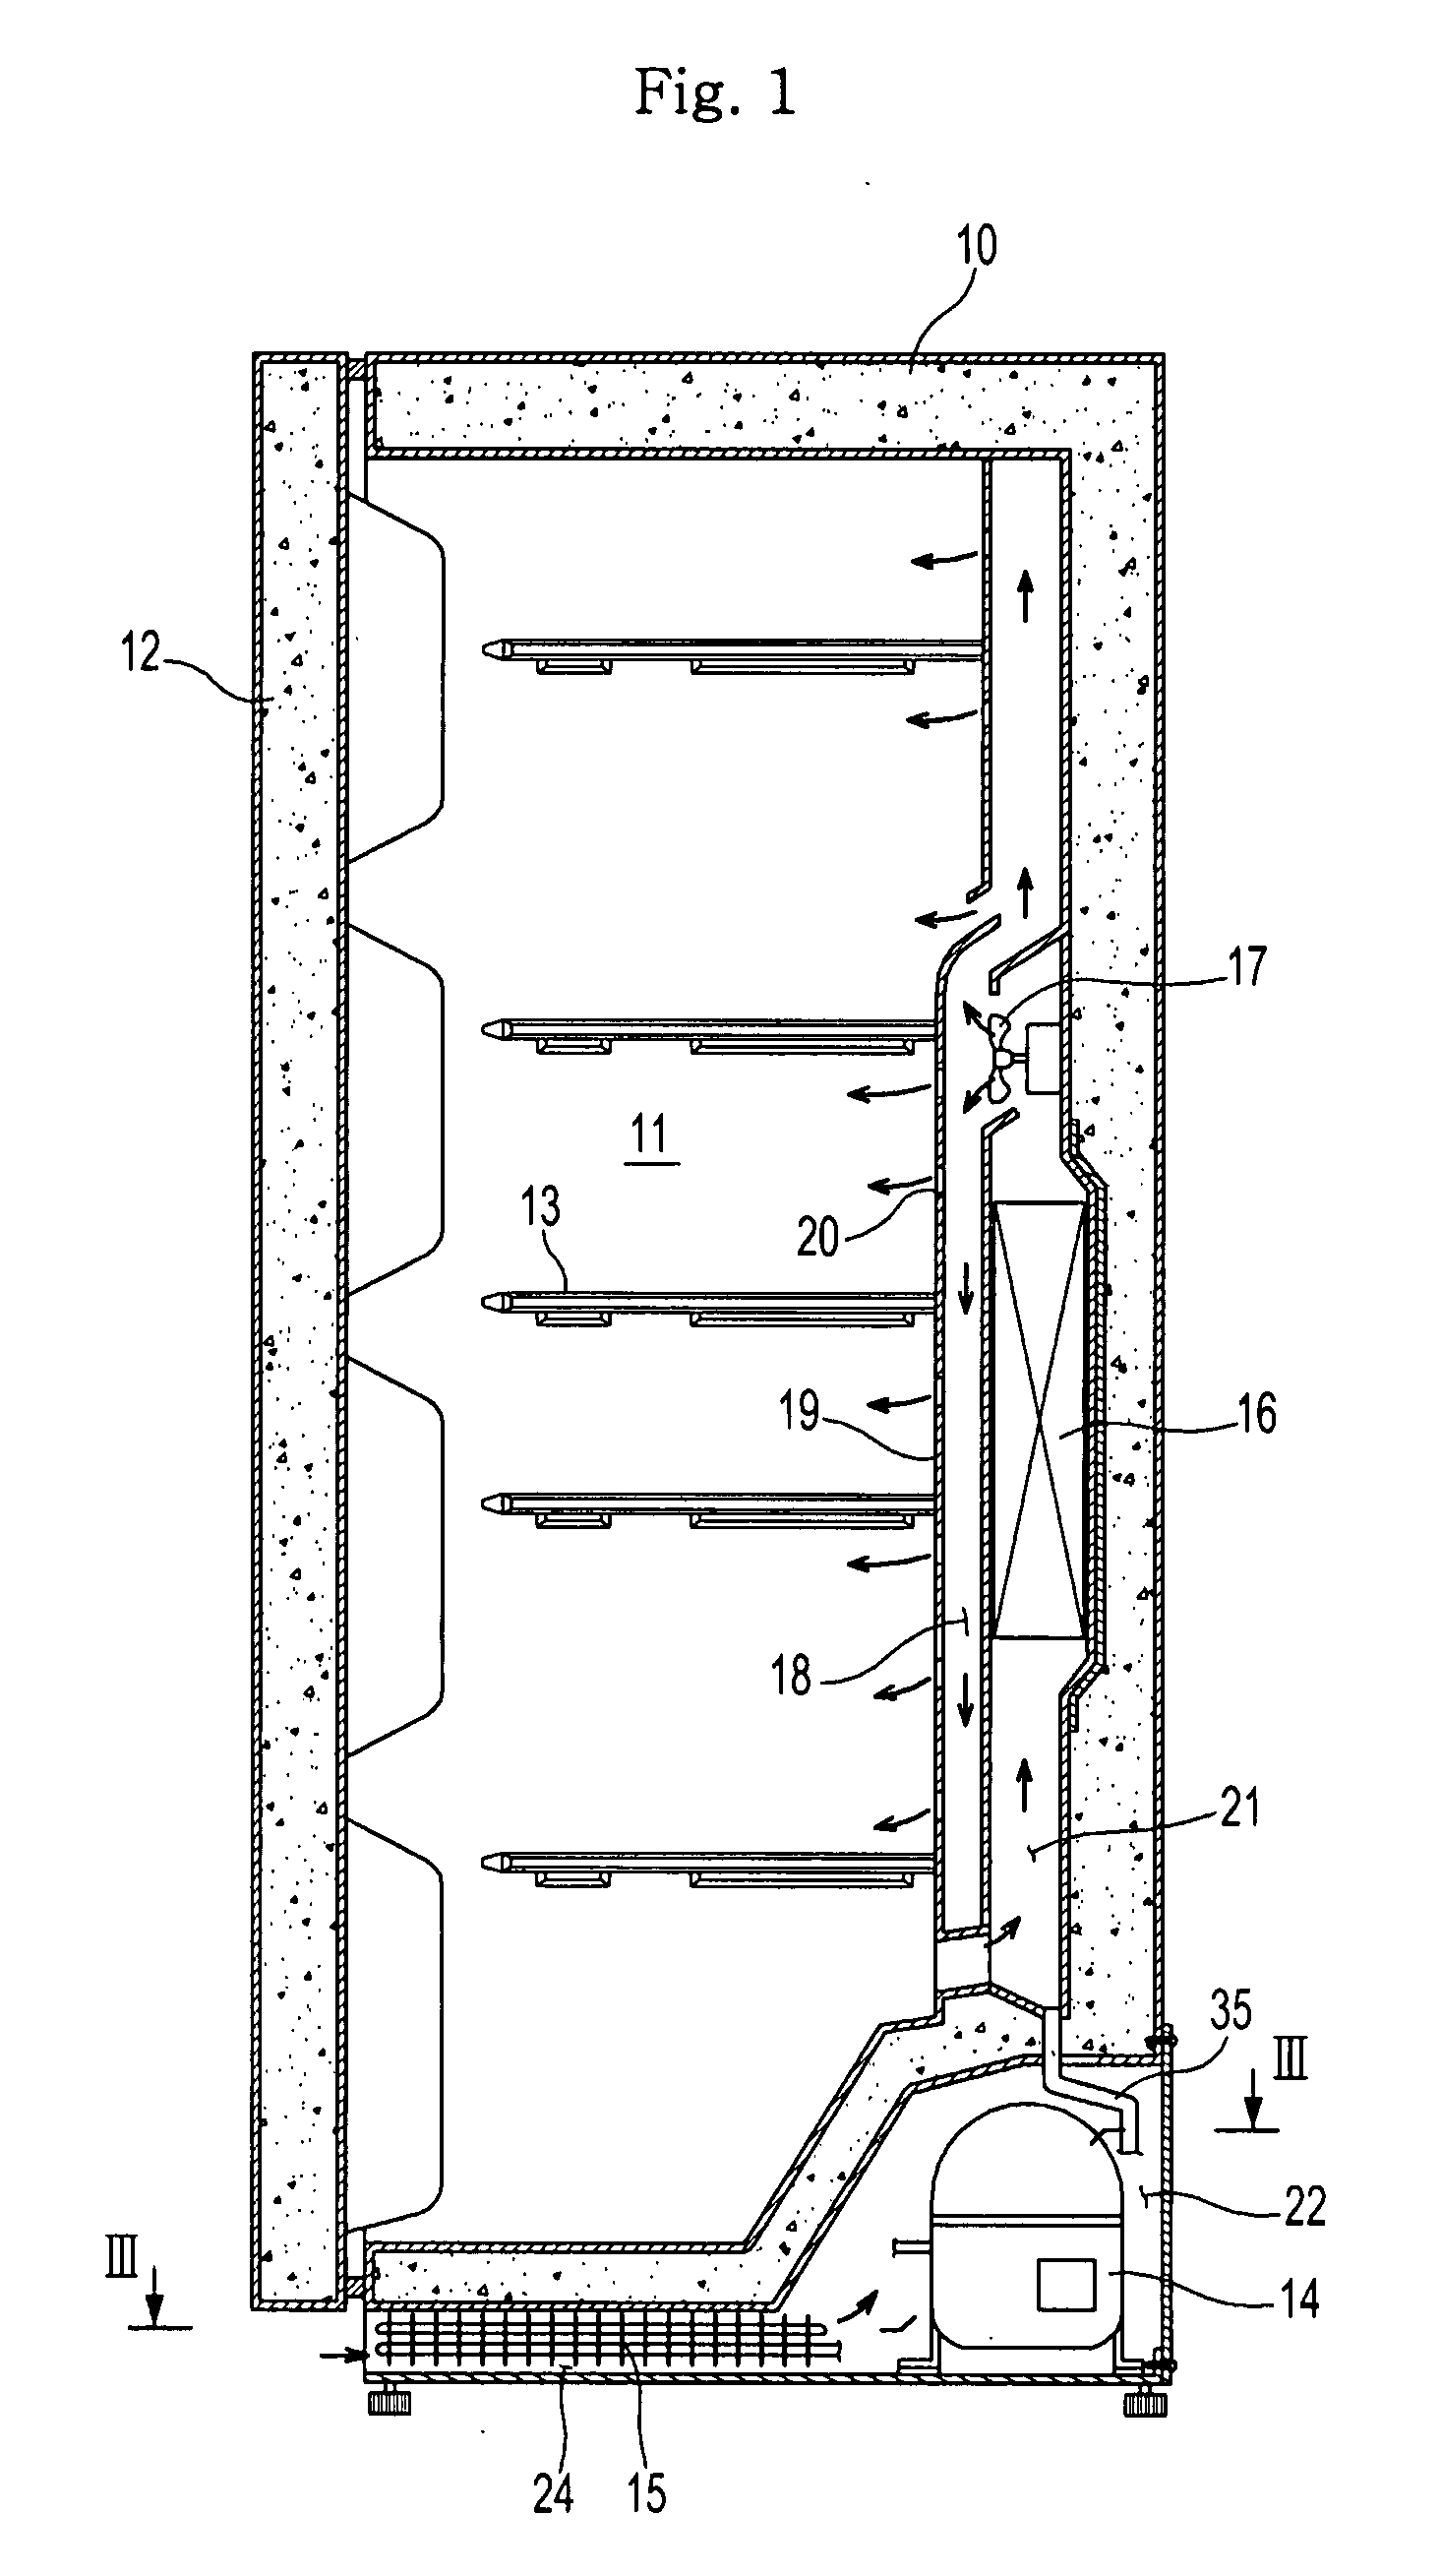 Refrigerator with air guide duct